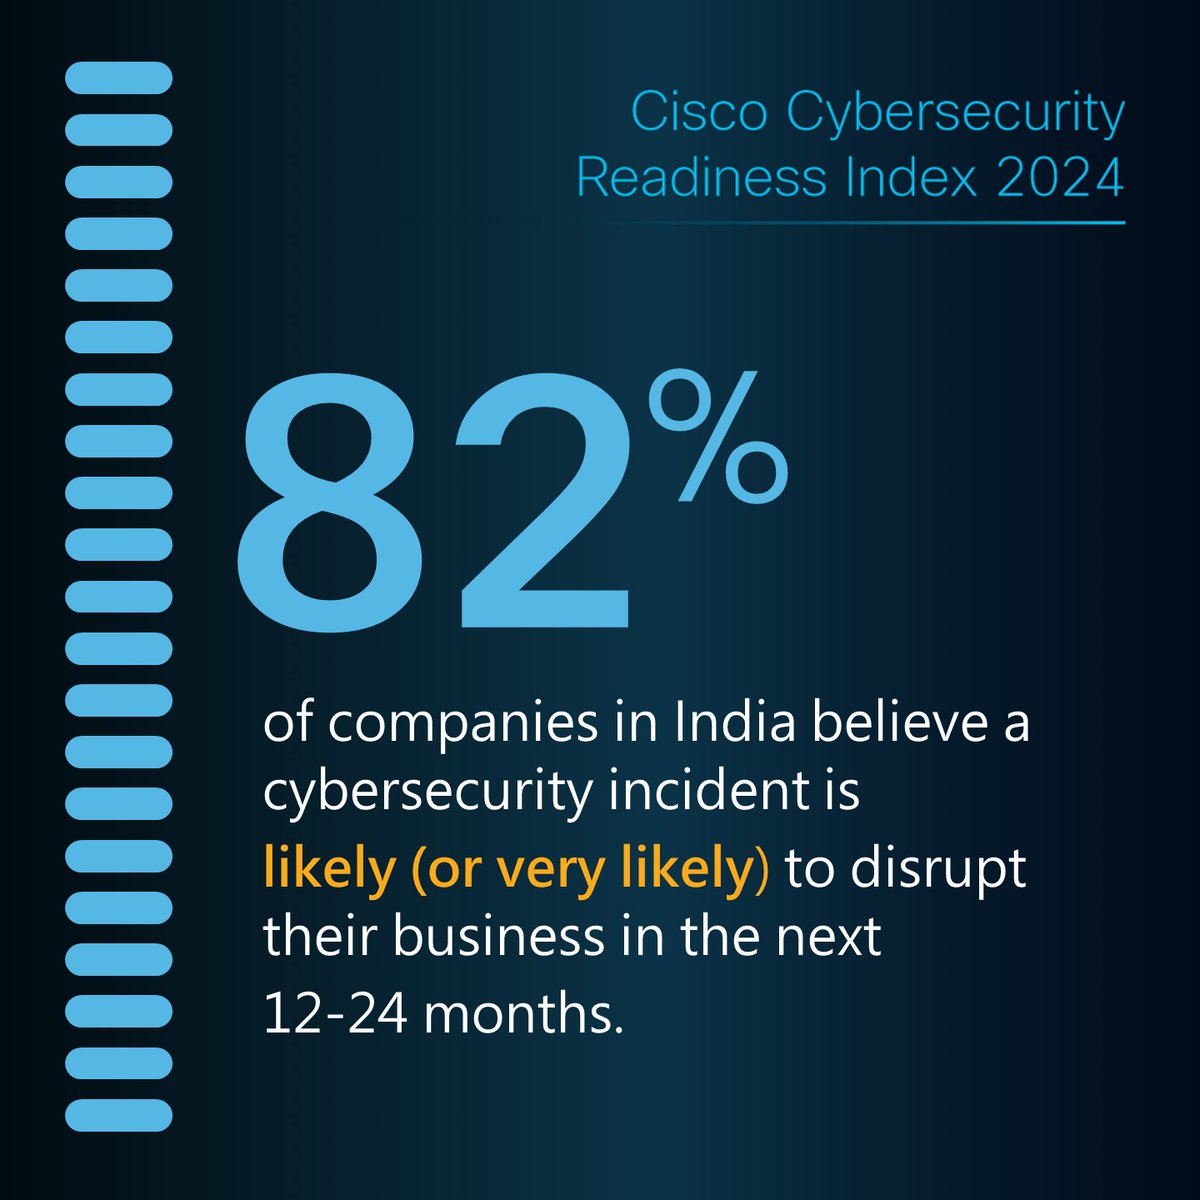 Being overconfident in cyber defenses might leave you unprepared. Learn more from the 2024 Cisco #Cybersecurity Index: ➡️ cs.co/6018Zb12k